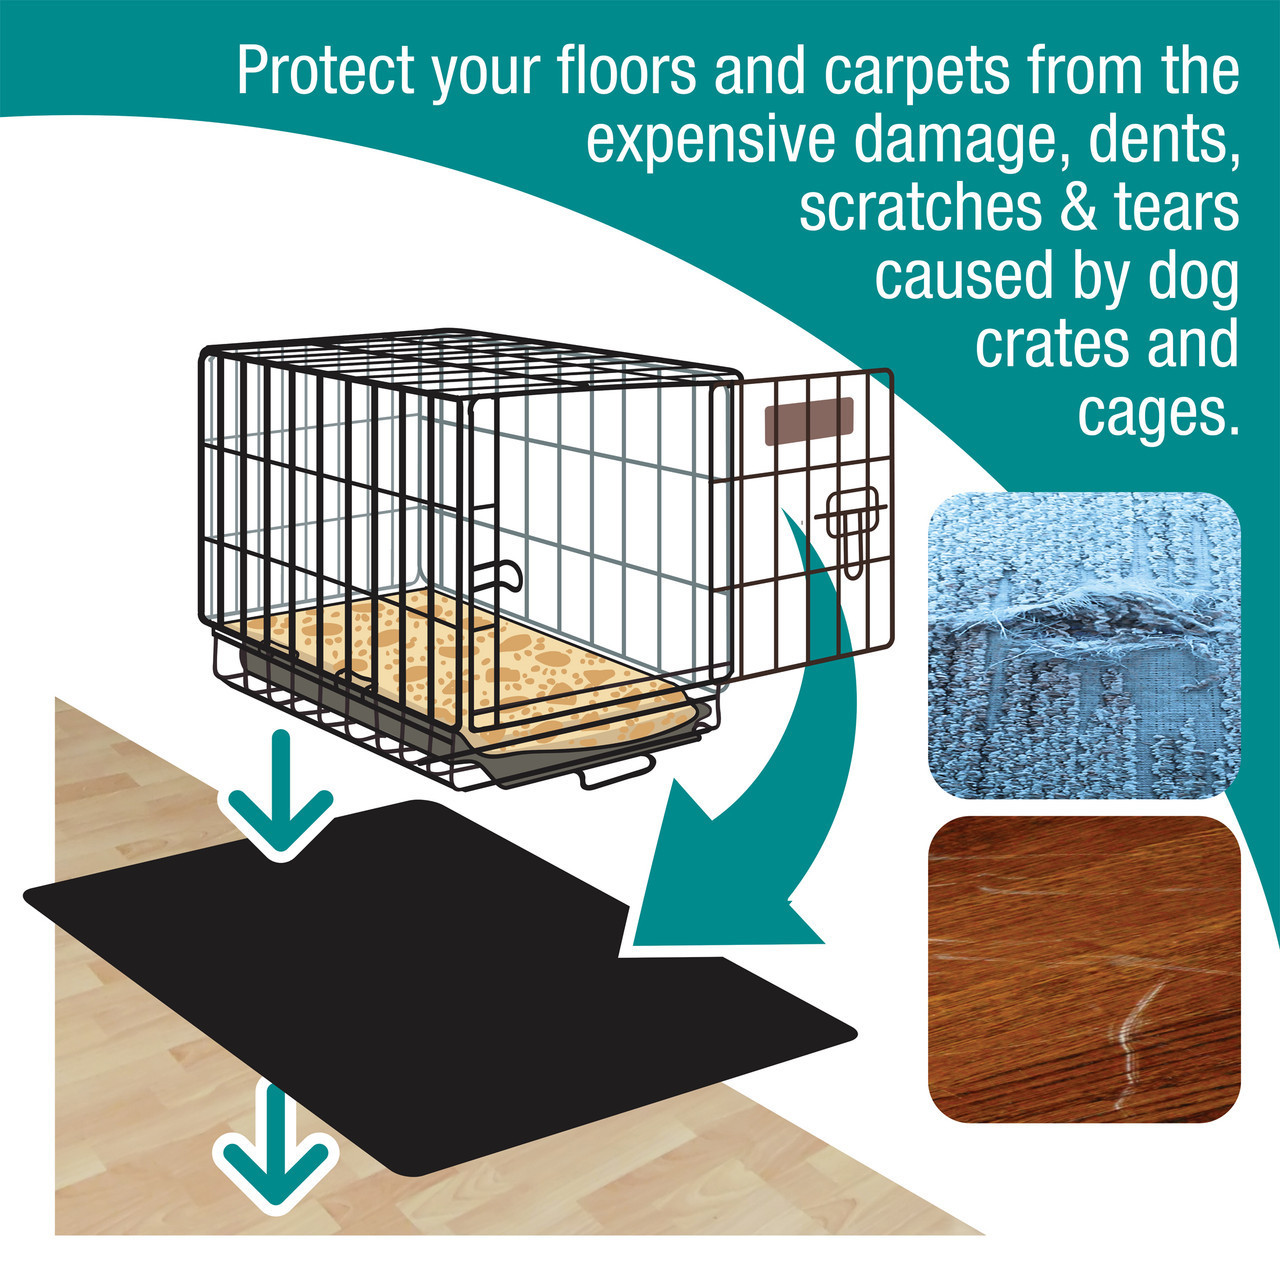 P-Tex Pet Crate Polypropylene Floor Protection Mat for Use on Hard